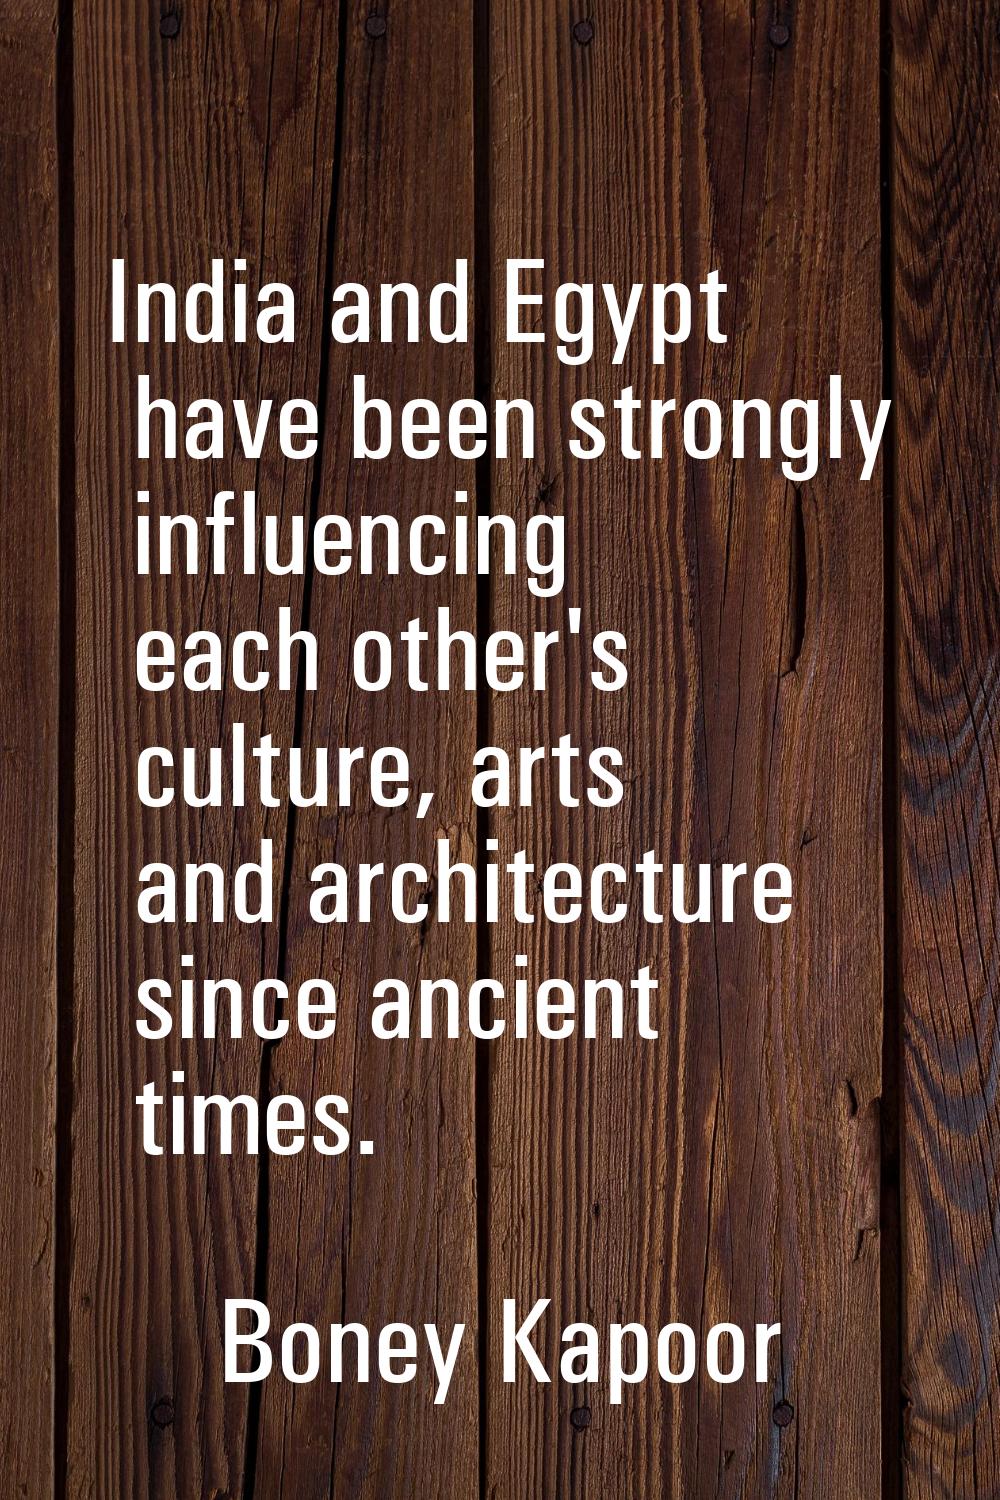 India and Egypt have been strongly influencing each other's culture, arts and architecture since an